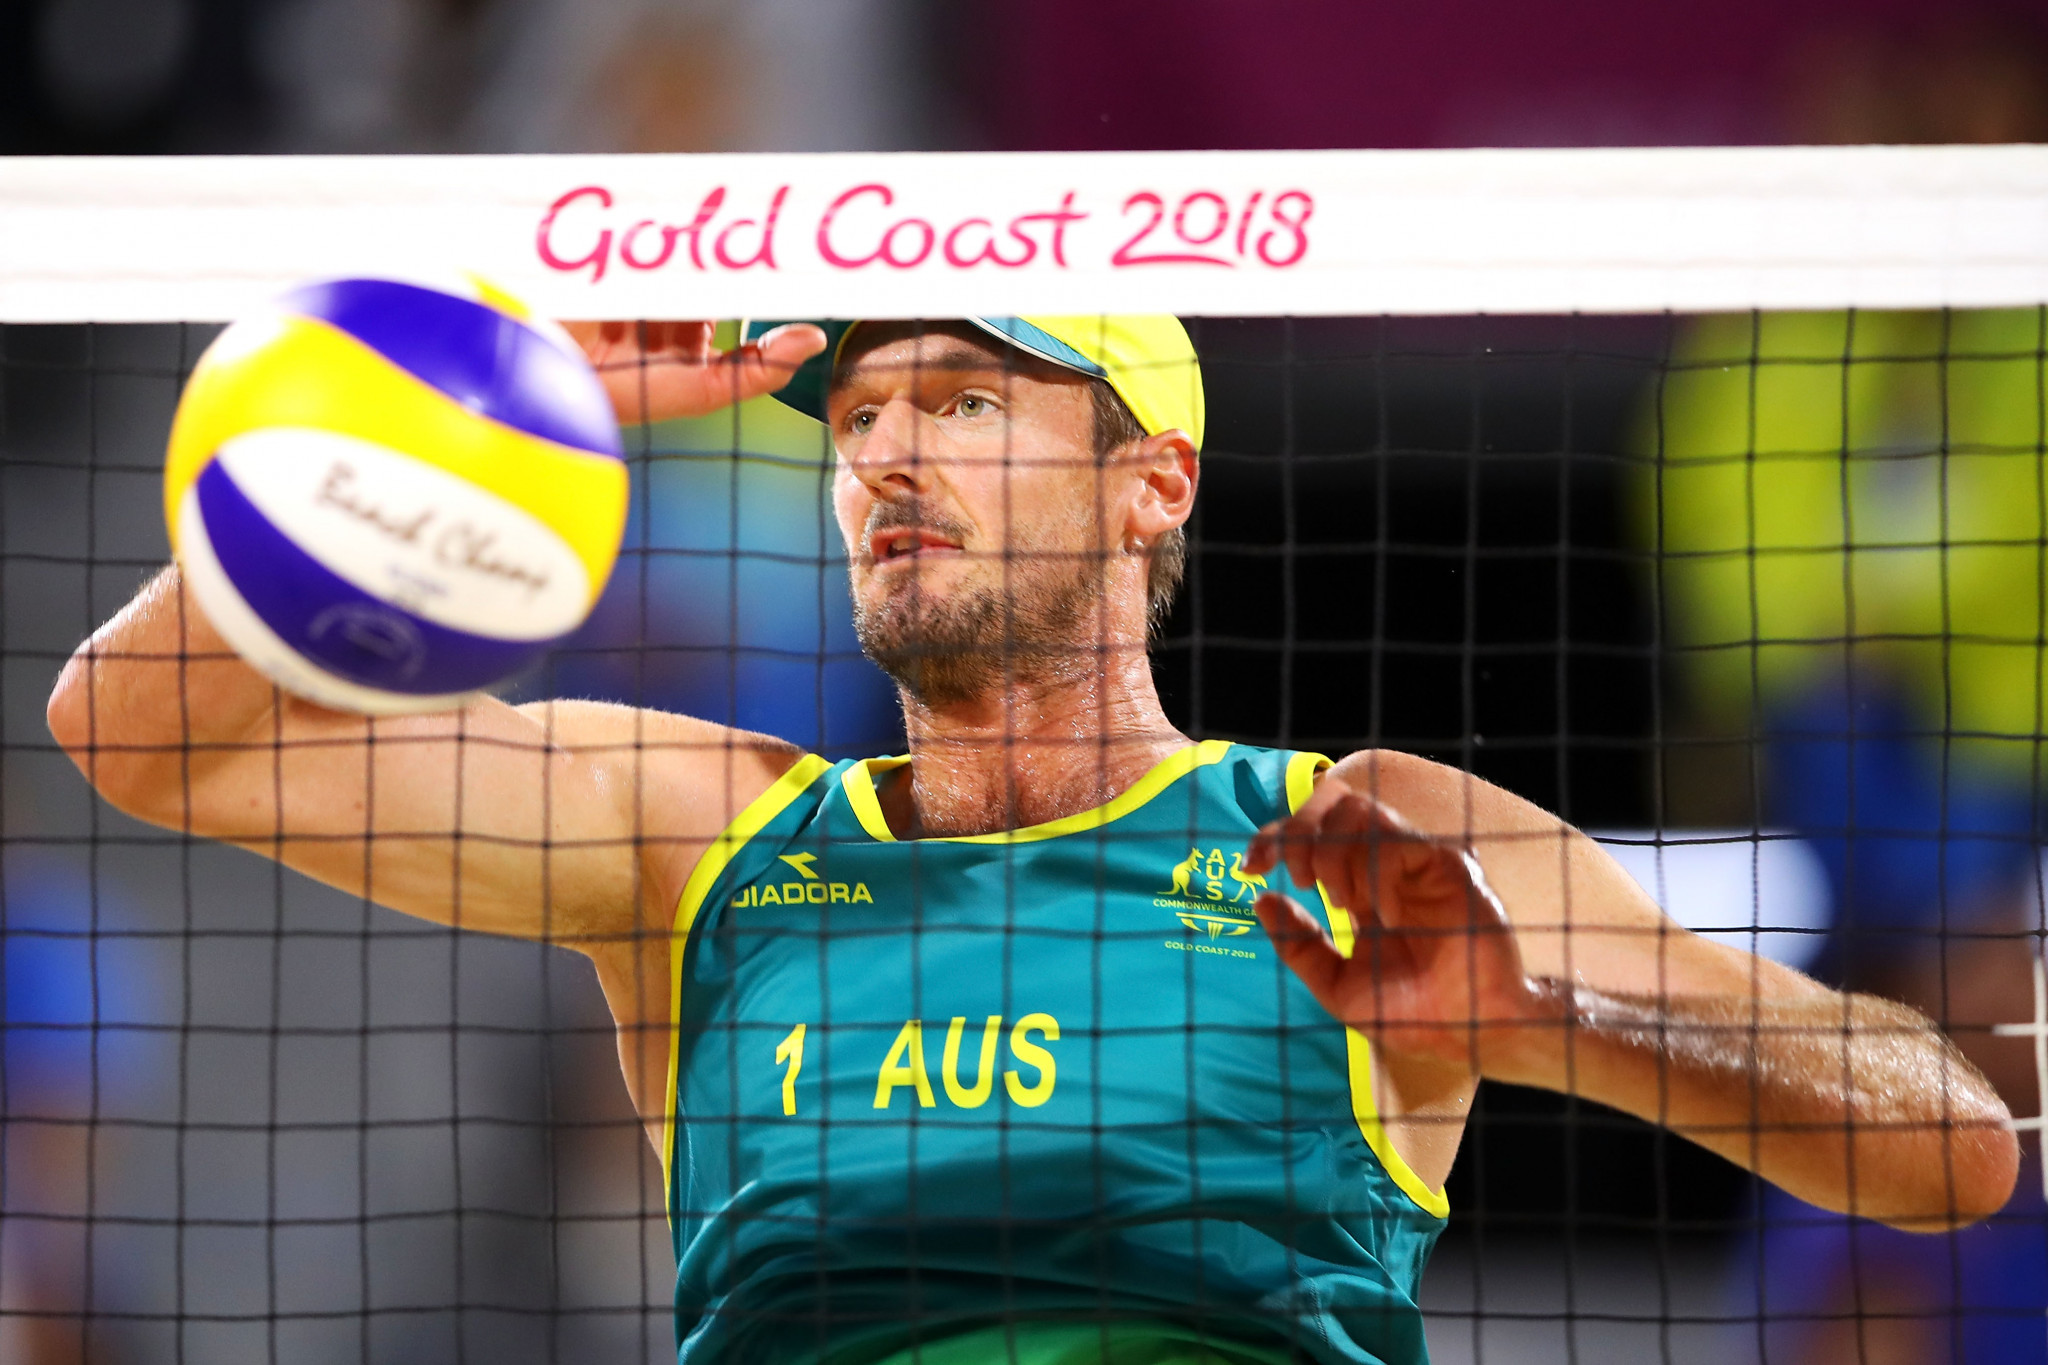 Beach volleyball made its Commonwealth Games debut at Gold Coast 2018 ©Getty Images